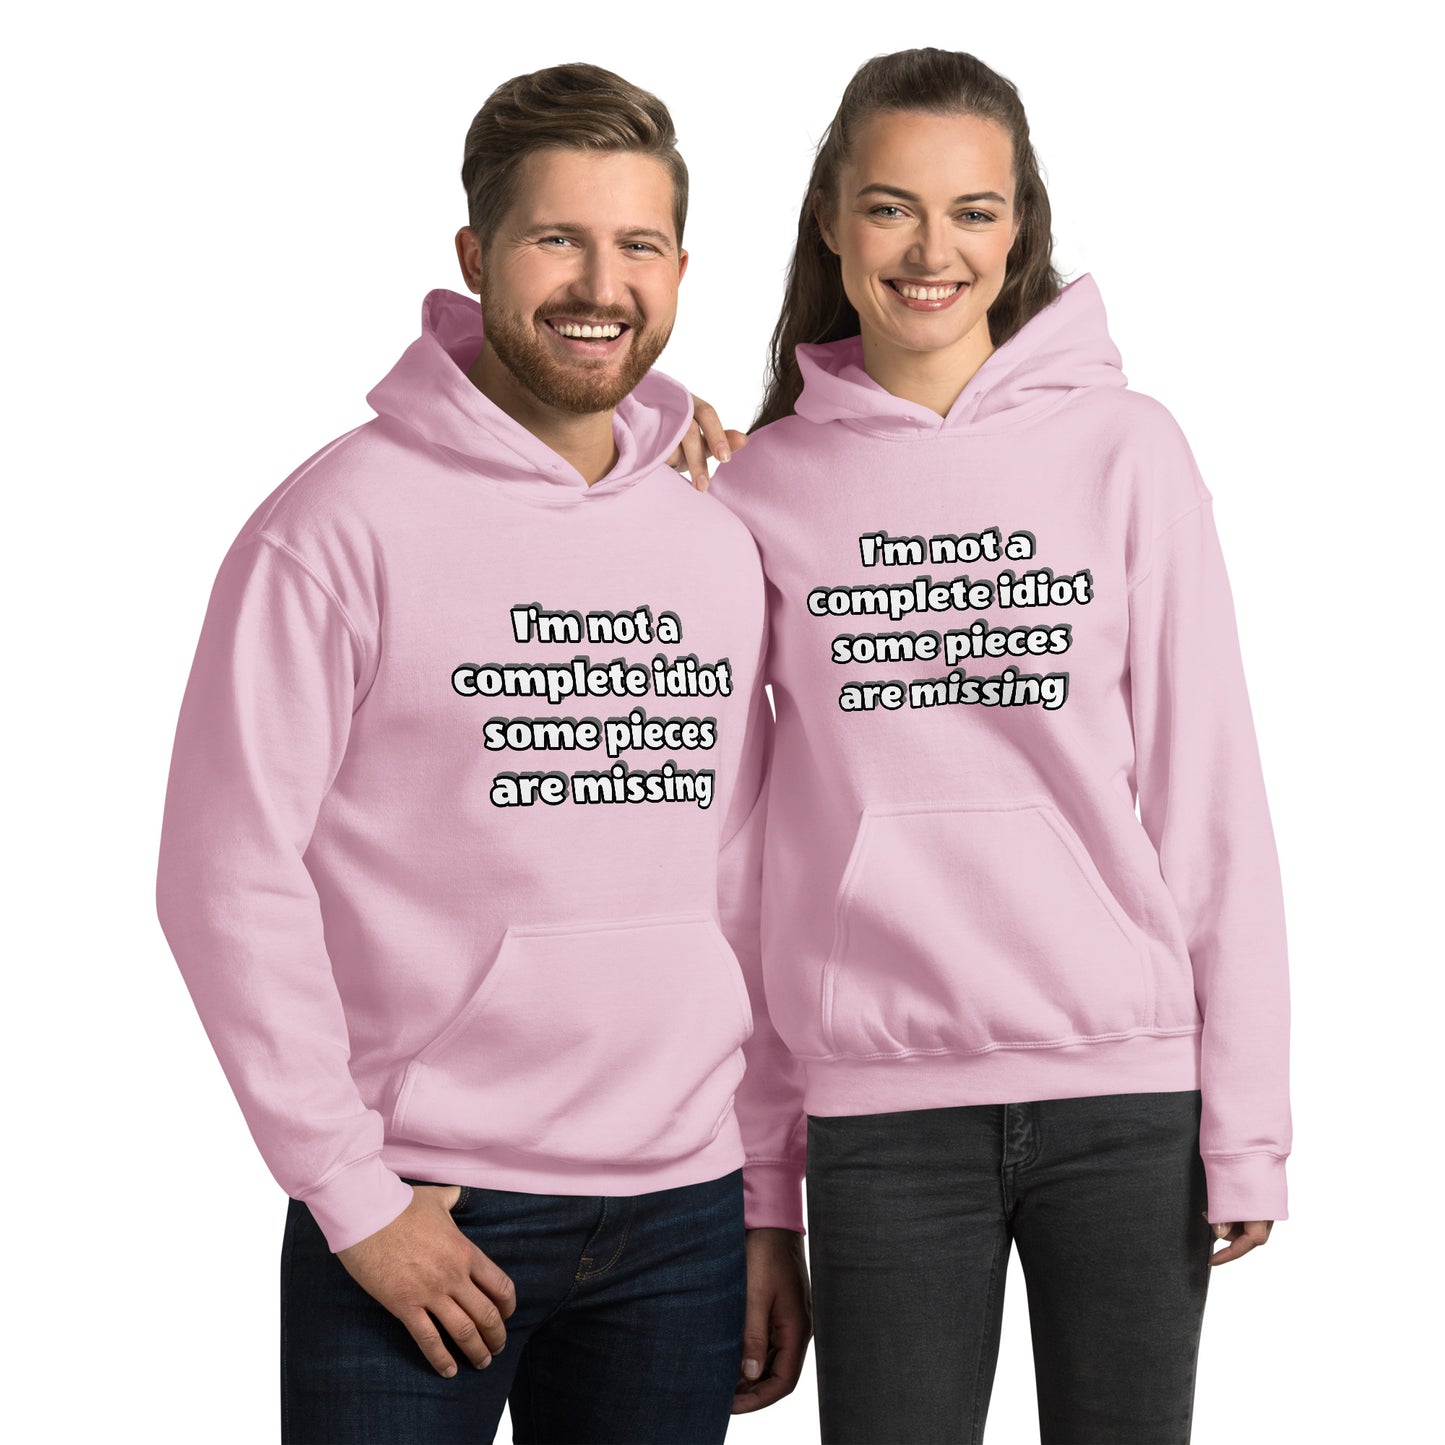 Men and women with pink hoodie with text “I’m not a complete idiot, some pieces are missing”